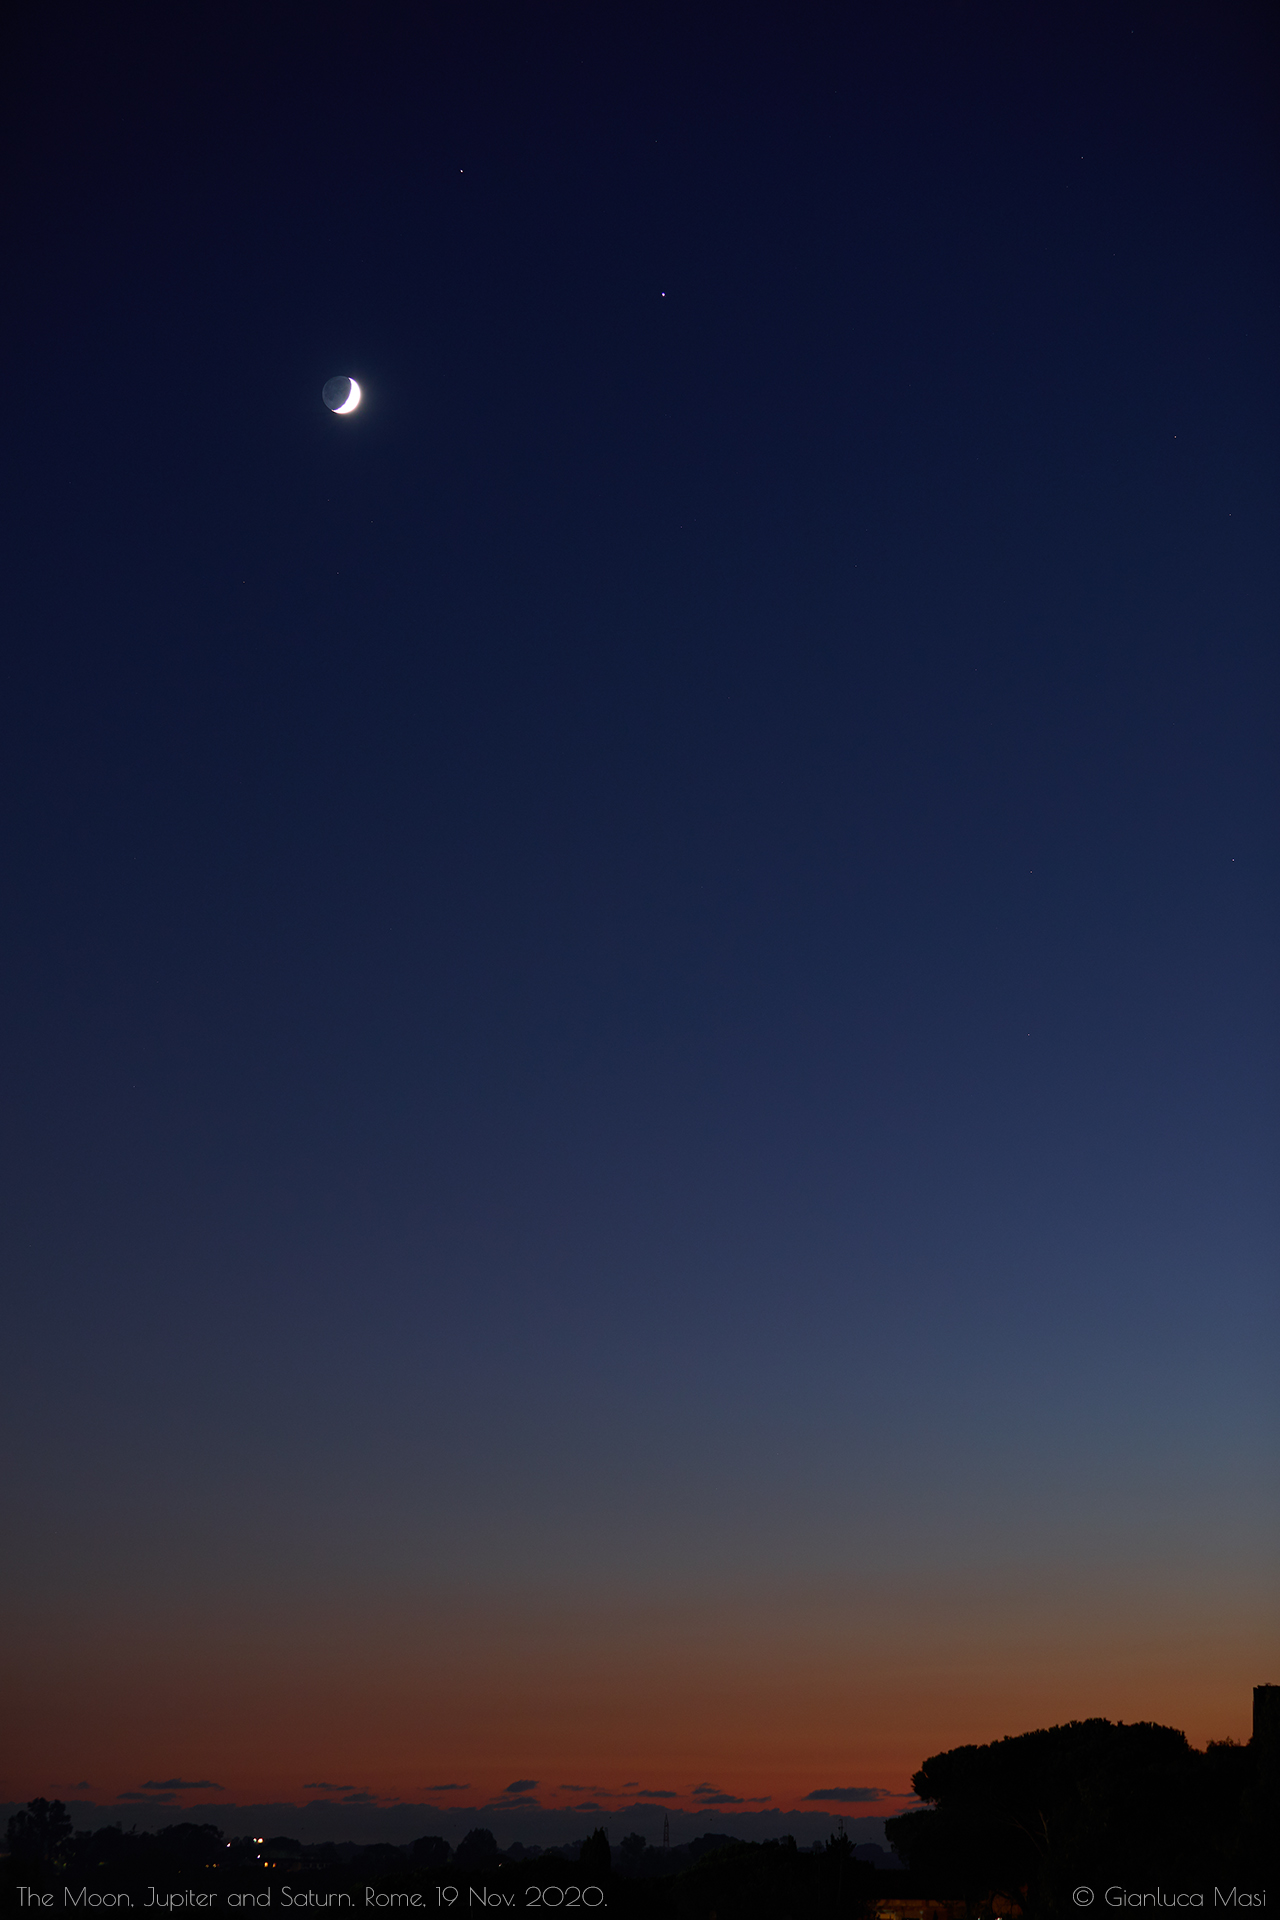 The Moon, Jupiter and Saturn in the glorious colors of sunset. 19 Nov. 2020.